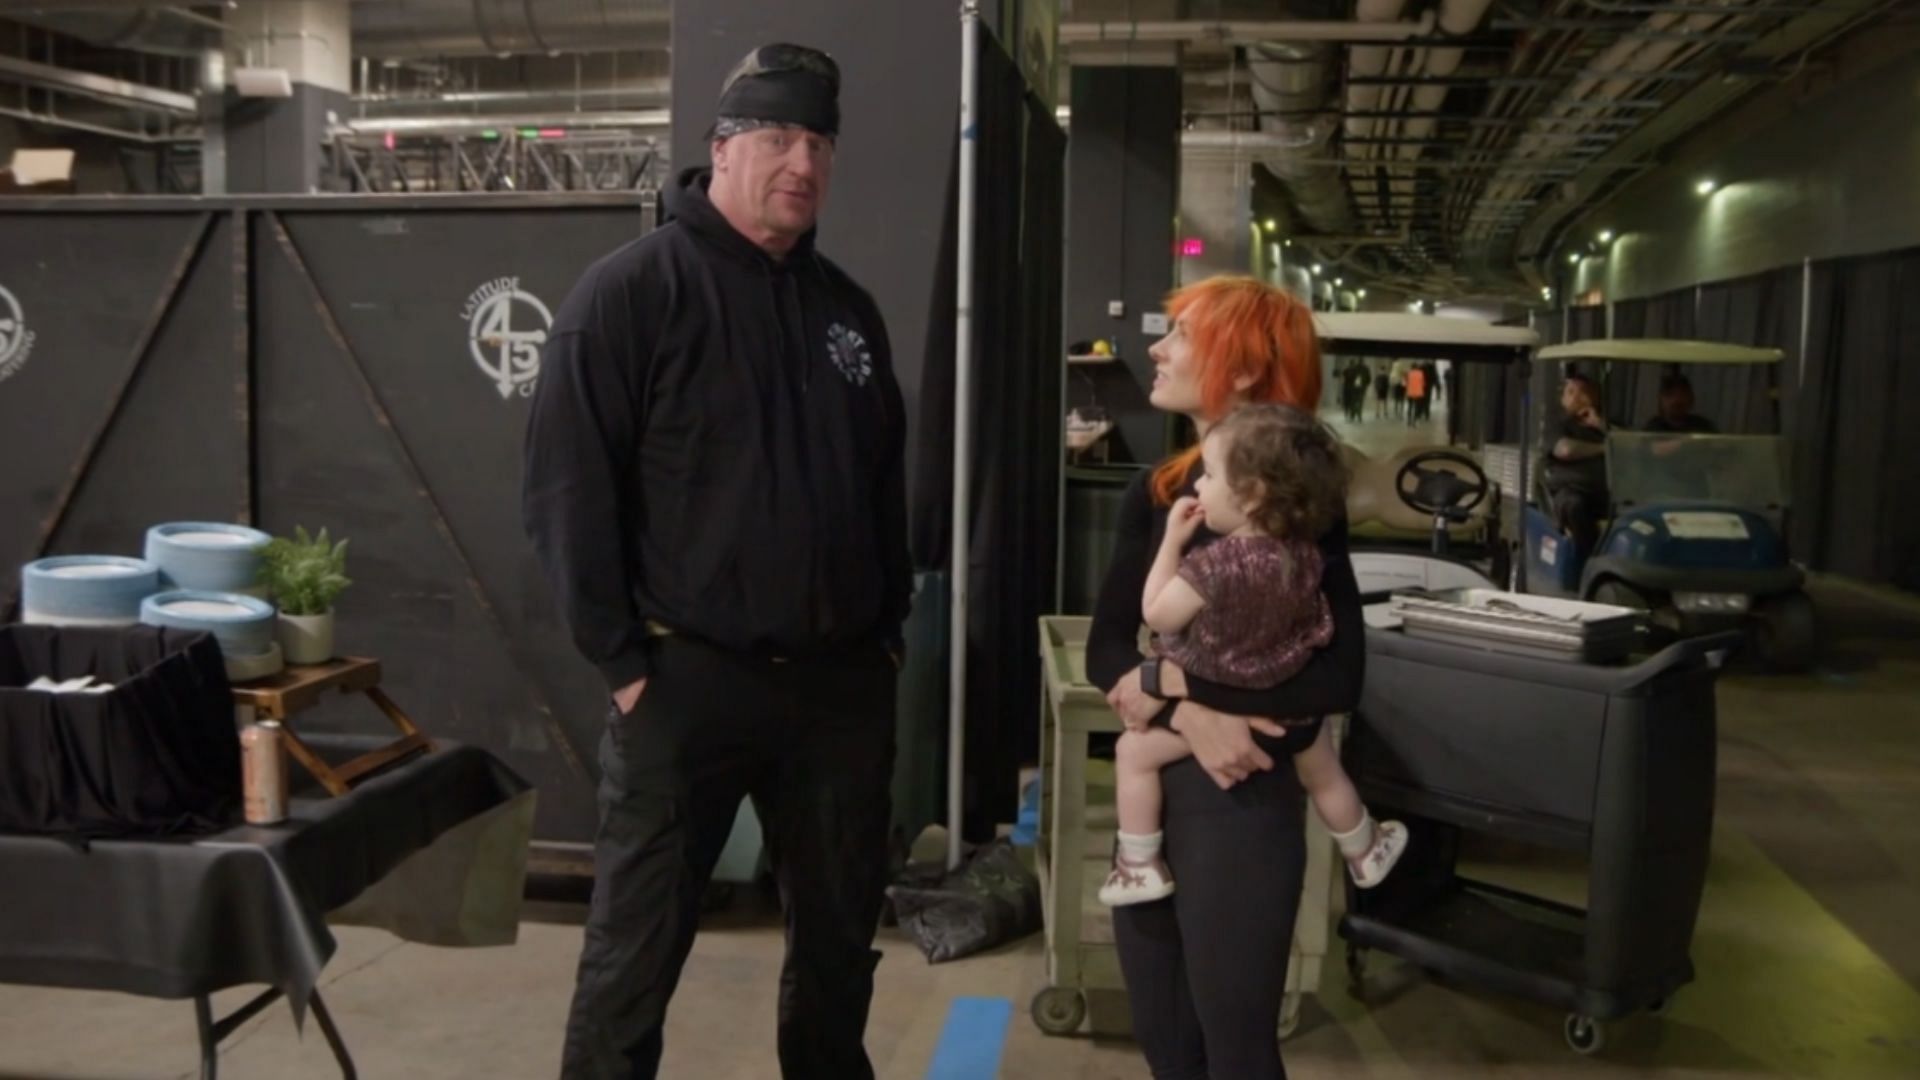 The Undertaker and Becky Lynch backstage